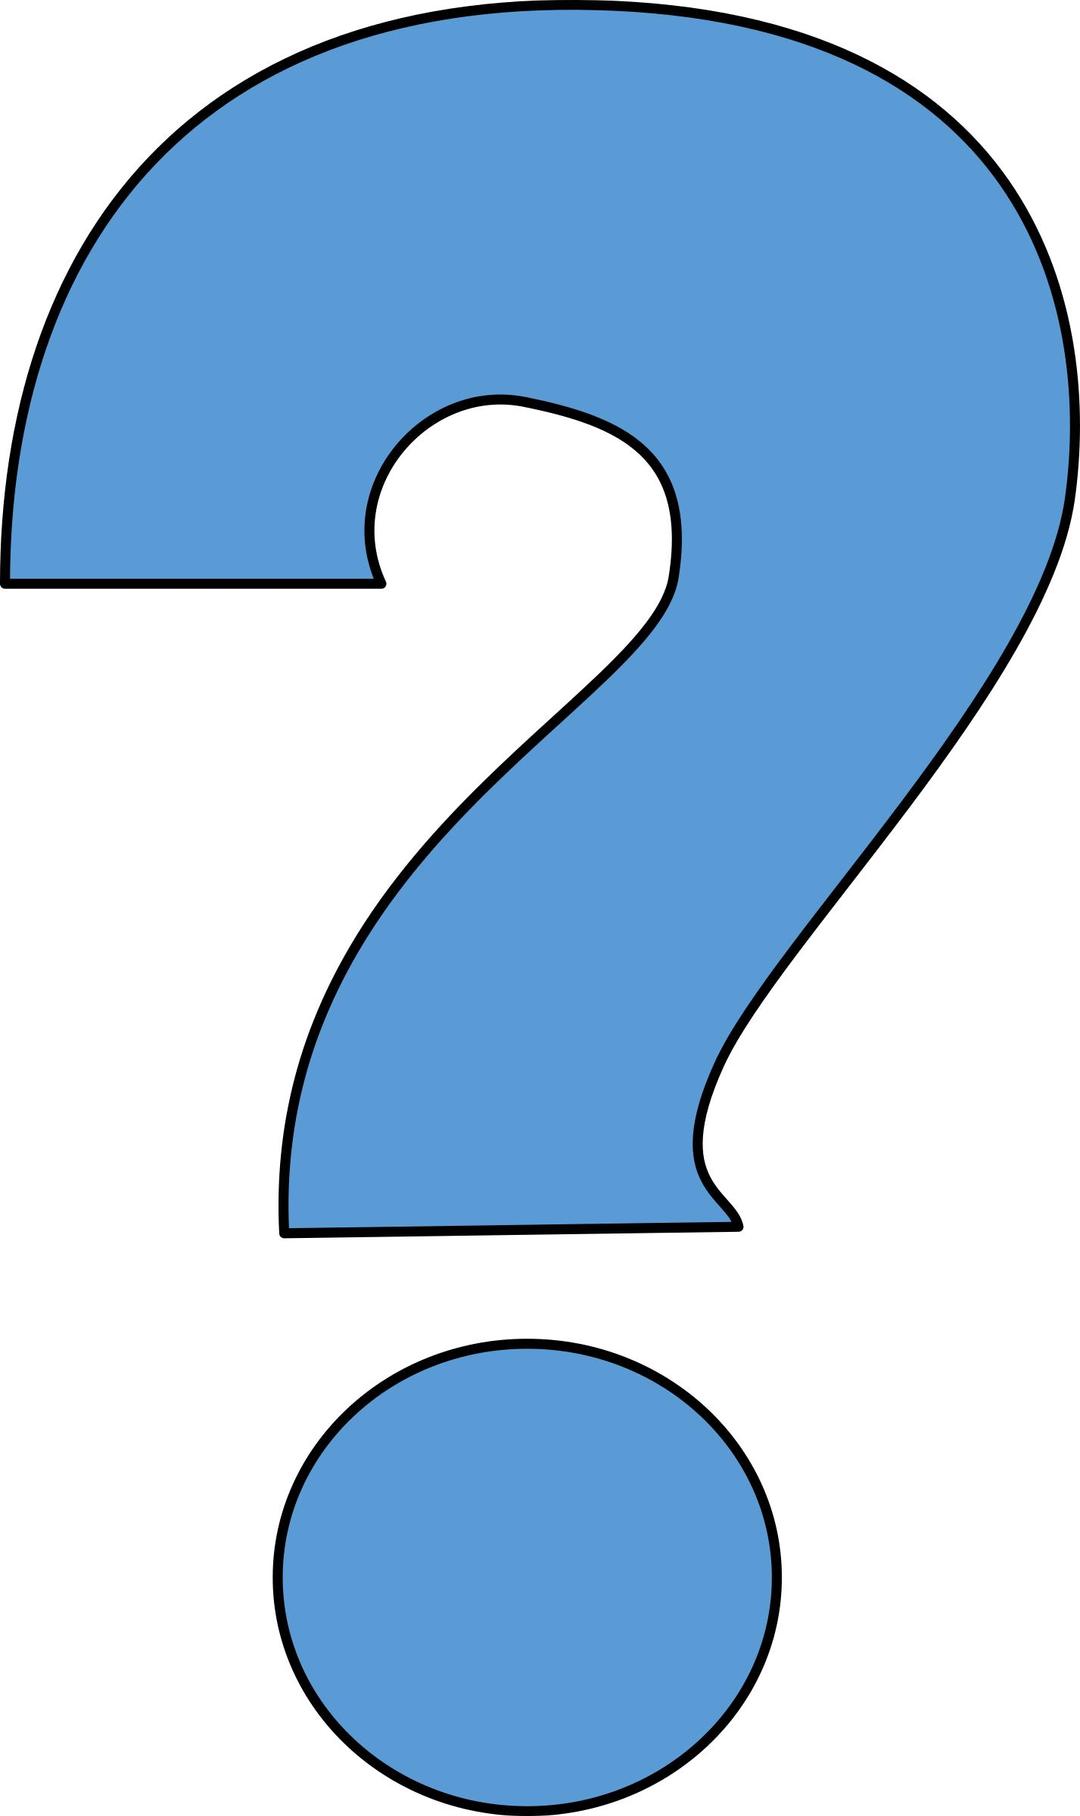 Slightly Styled Question Mark png transparent